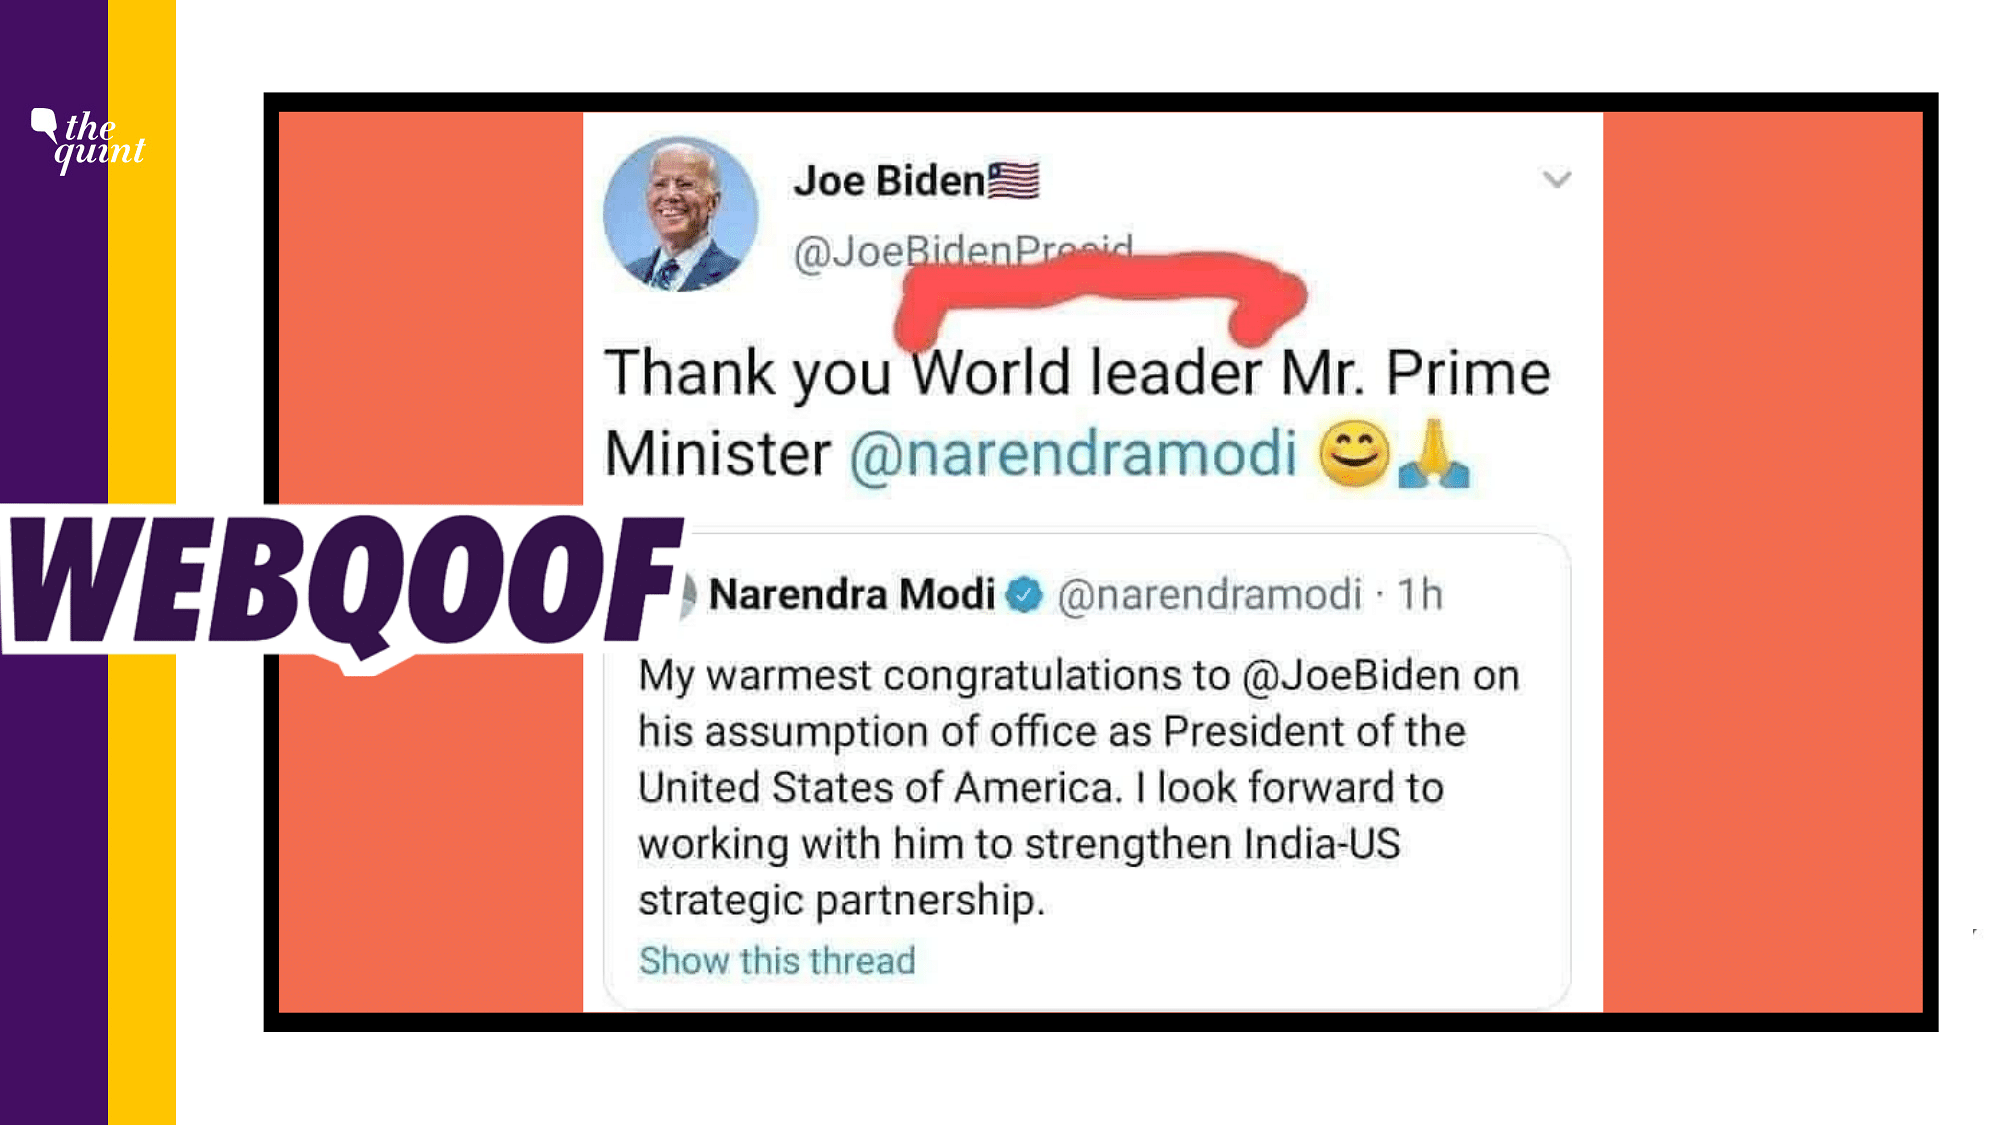 Fact-Check of Tweet of Joe Biden on PM Modi | We found that the tweet was posted by an imposter account and President Biden made no such comment about PM Modi.